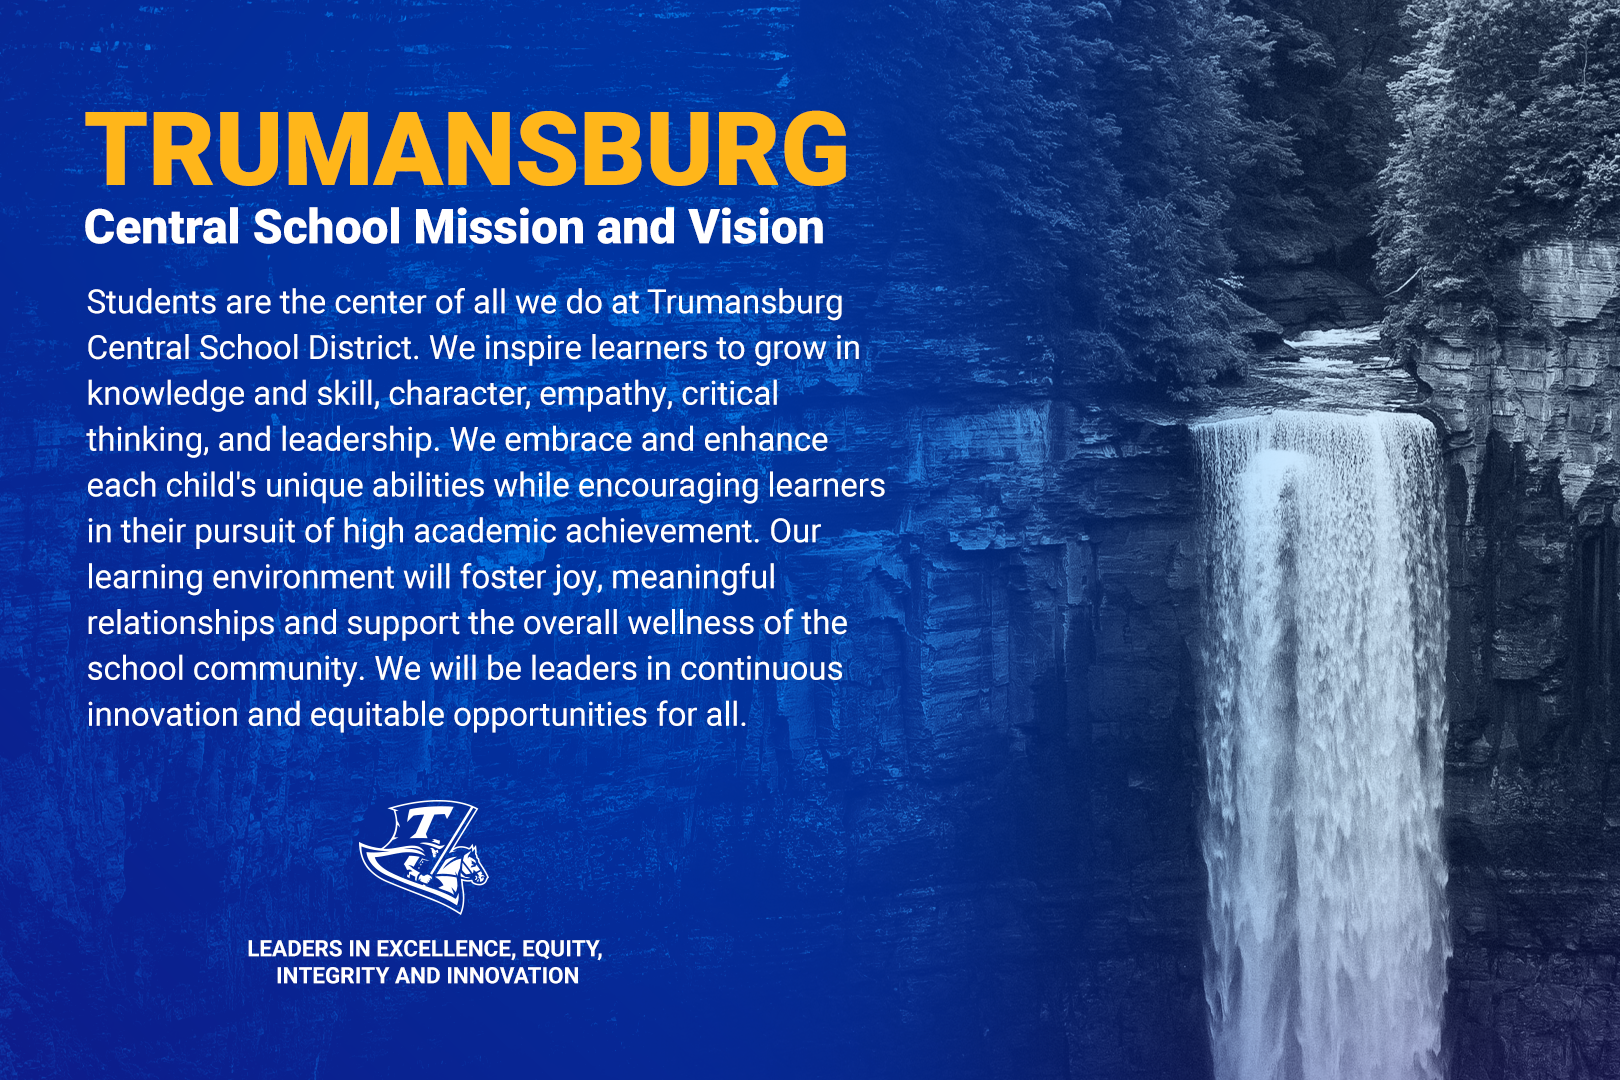 Students are the center of all we do at Trumansburg Central School District. We inspire learners to grow in knowledge and skill, character, empathy, critical thinking, and leadership. We embrace and enhance each child's unique abilities while encouraging learners in their pursuit of high academic achievement. Our learning environment will foster joy, meaningful relationships and support the overall wellness of the school community. We will be leaders in continuous innovation and equitable opportunities for all.